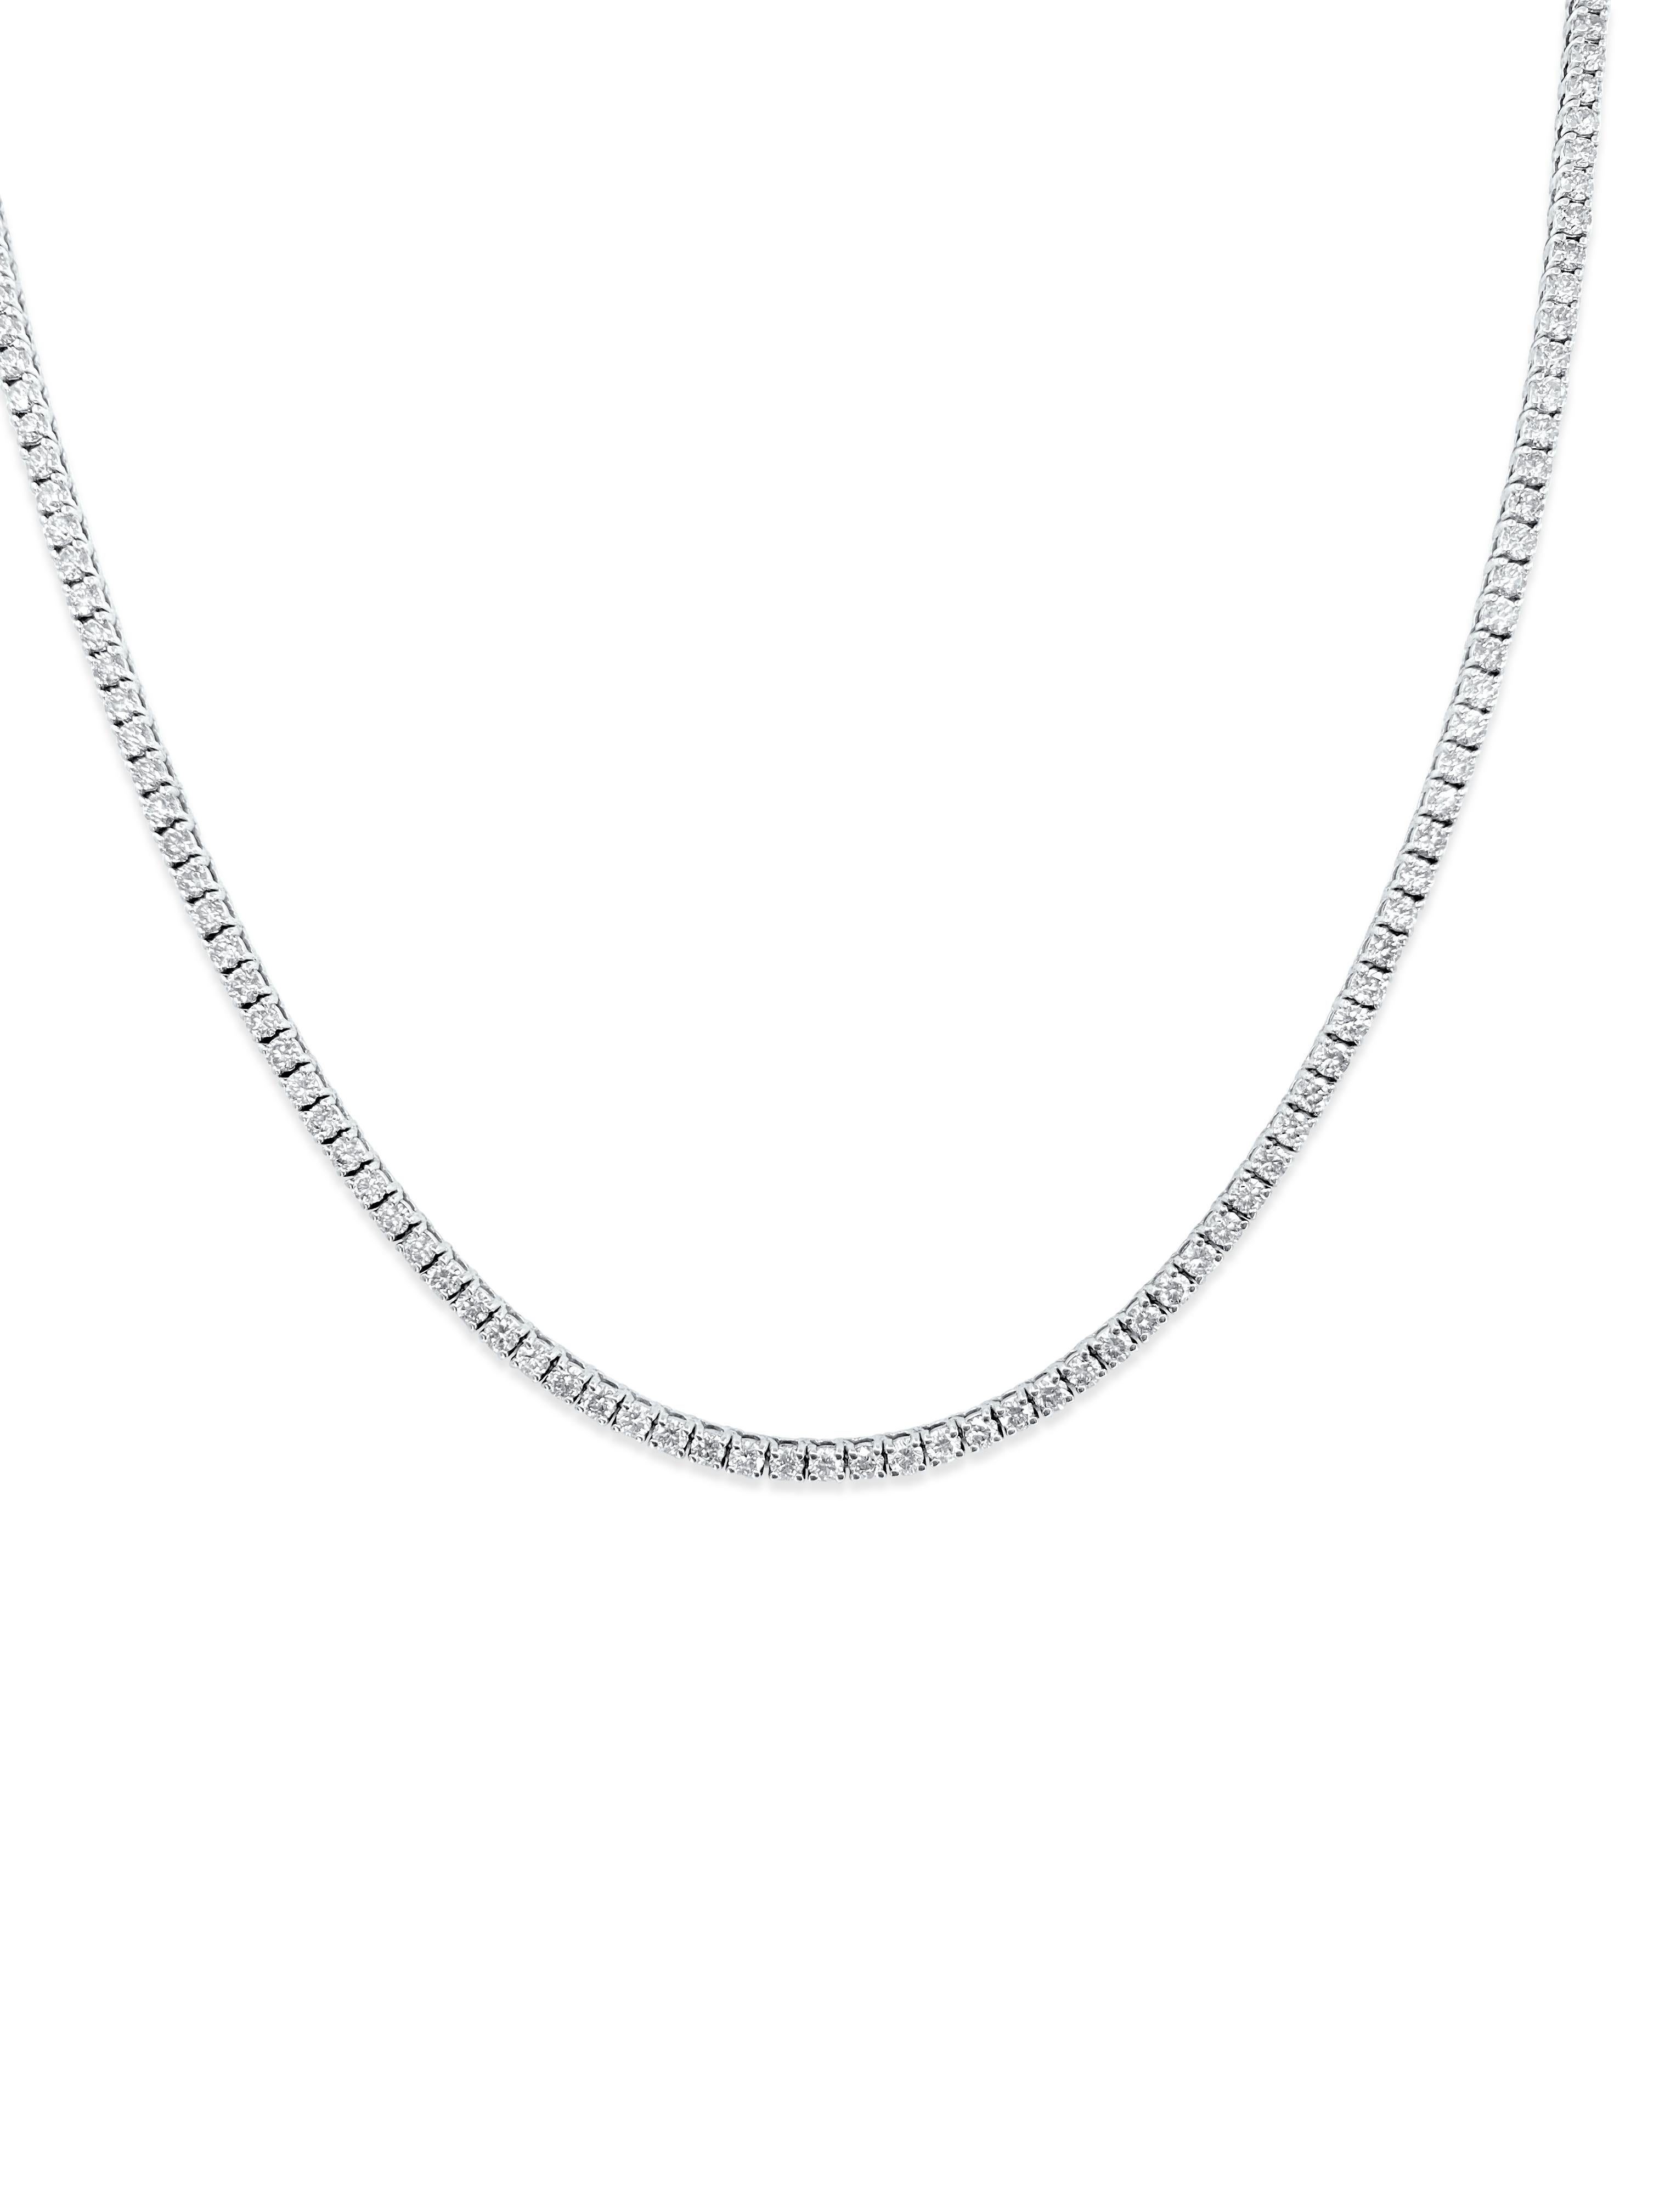 Round Cut 11.50ct VVS Diamond Tennis Necklace in 14k Gold For Sale